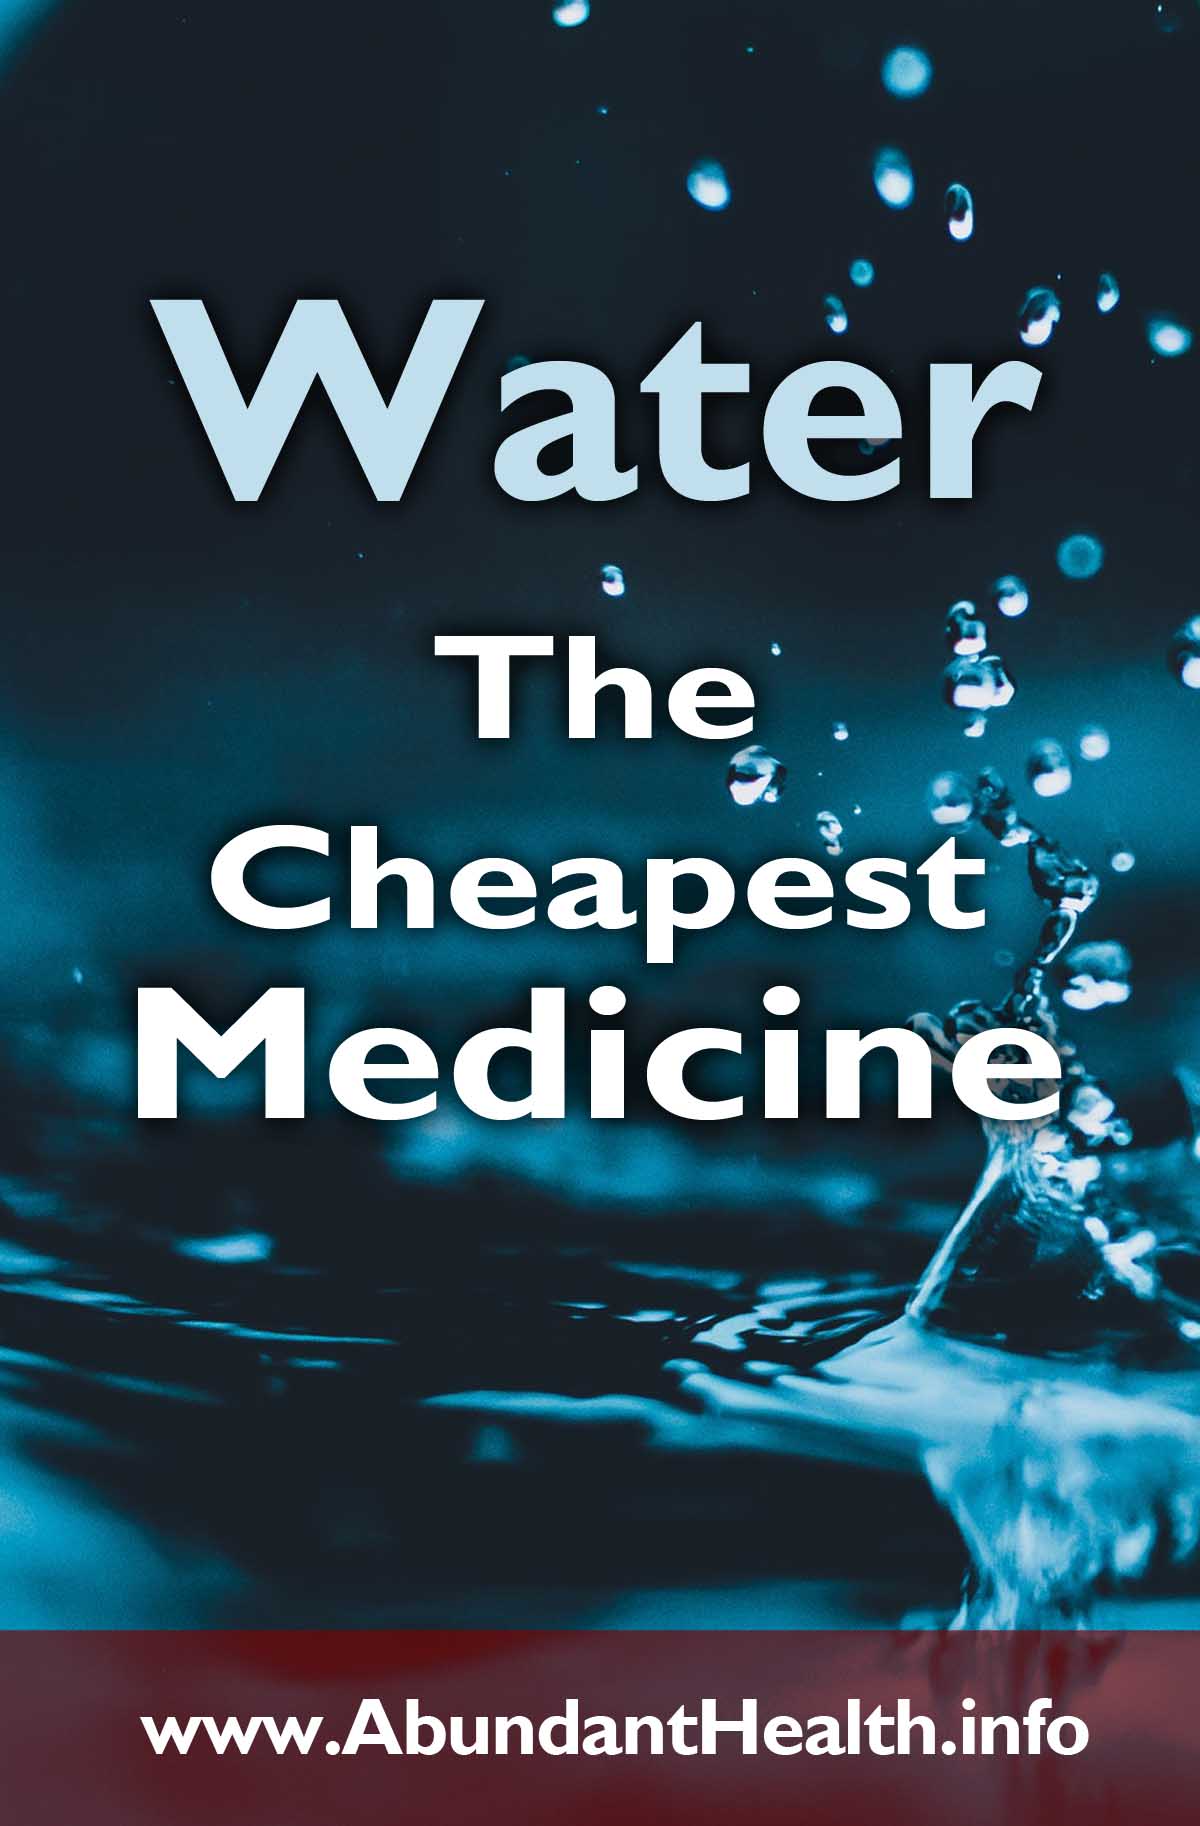 Water - The Cheapest Medicine